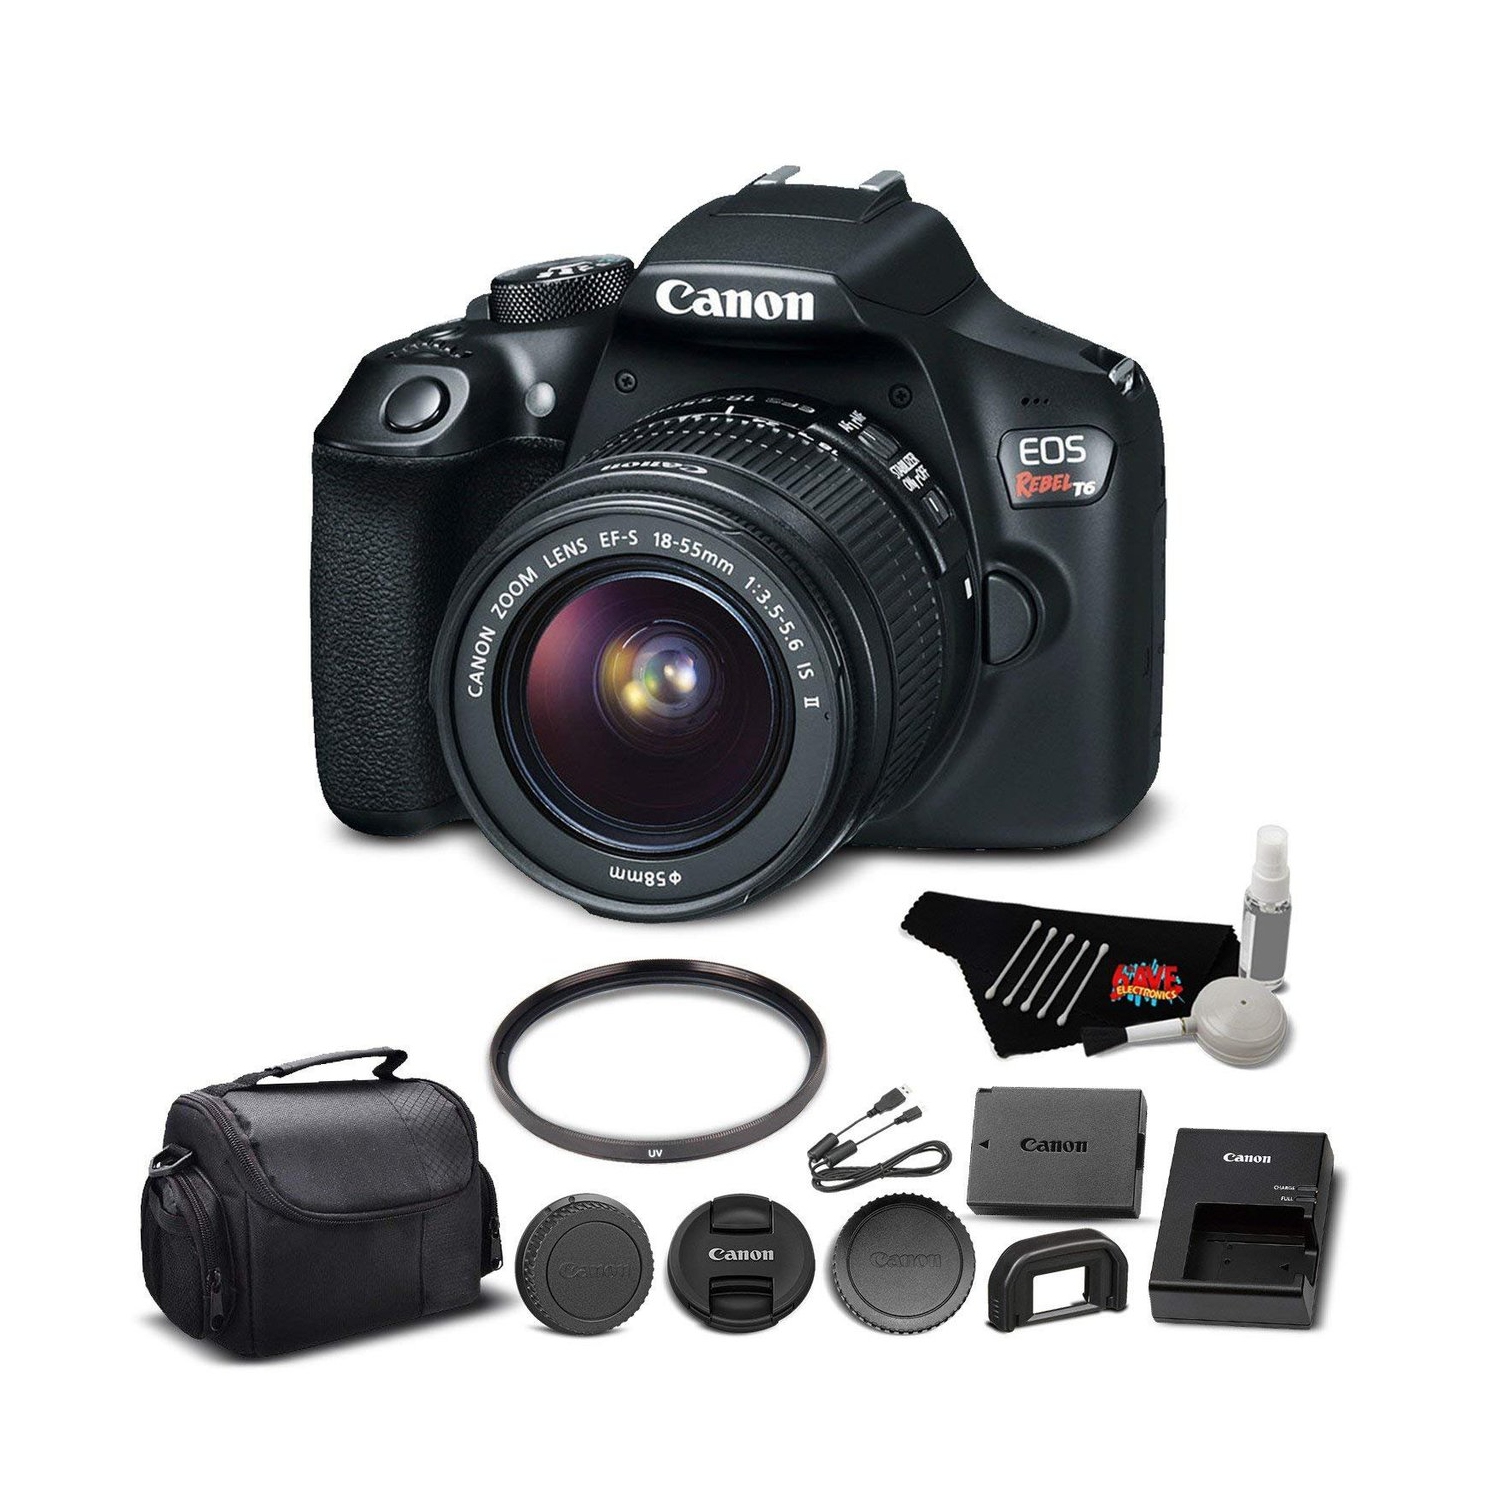 Canon EOS Rebel T6 Digital SLR Camera Bundle with EF-S 18-55mm f/3.5-5.6 is II Lens with UV Filter + Carrying Case